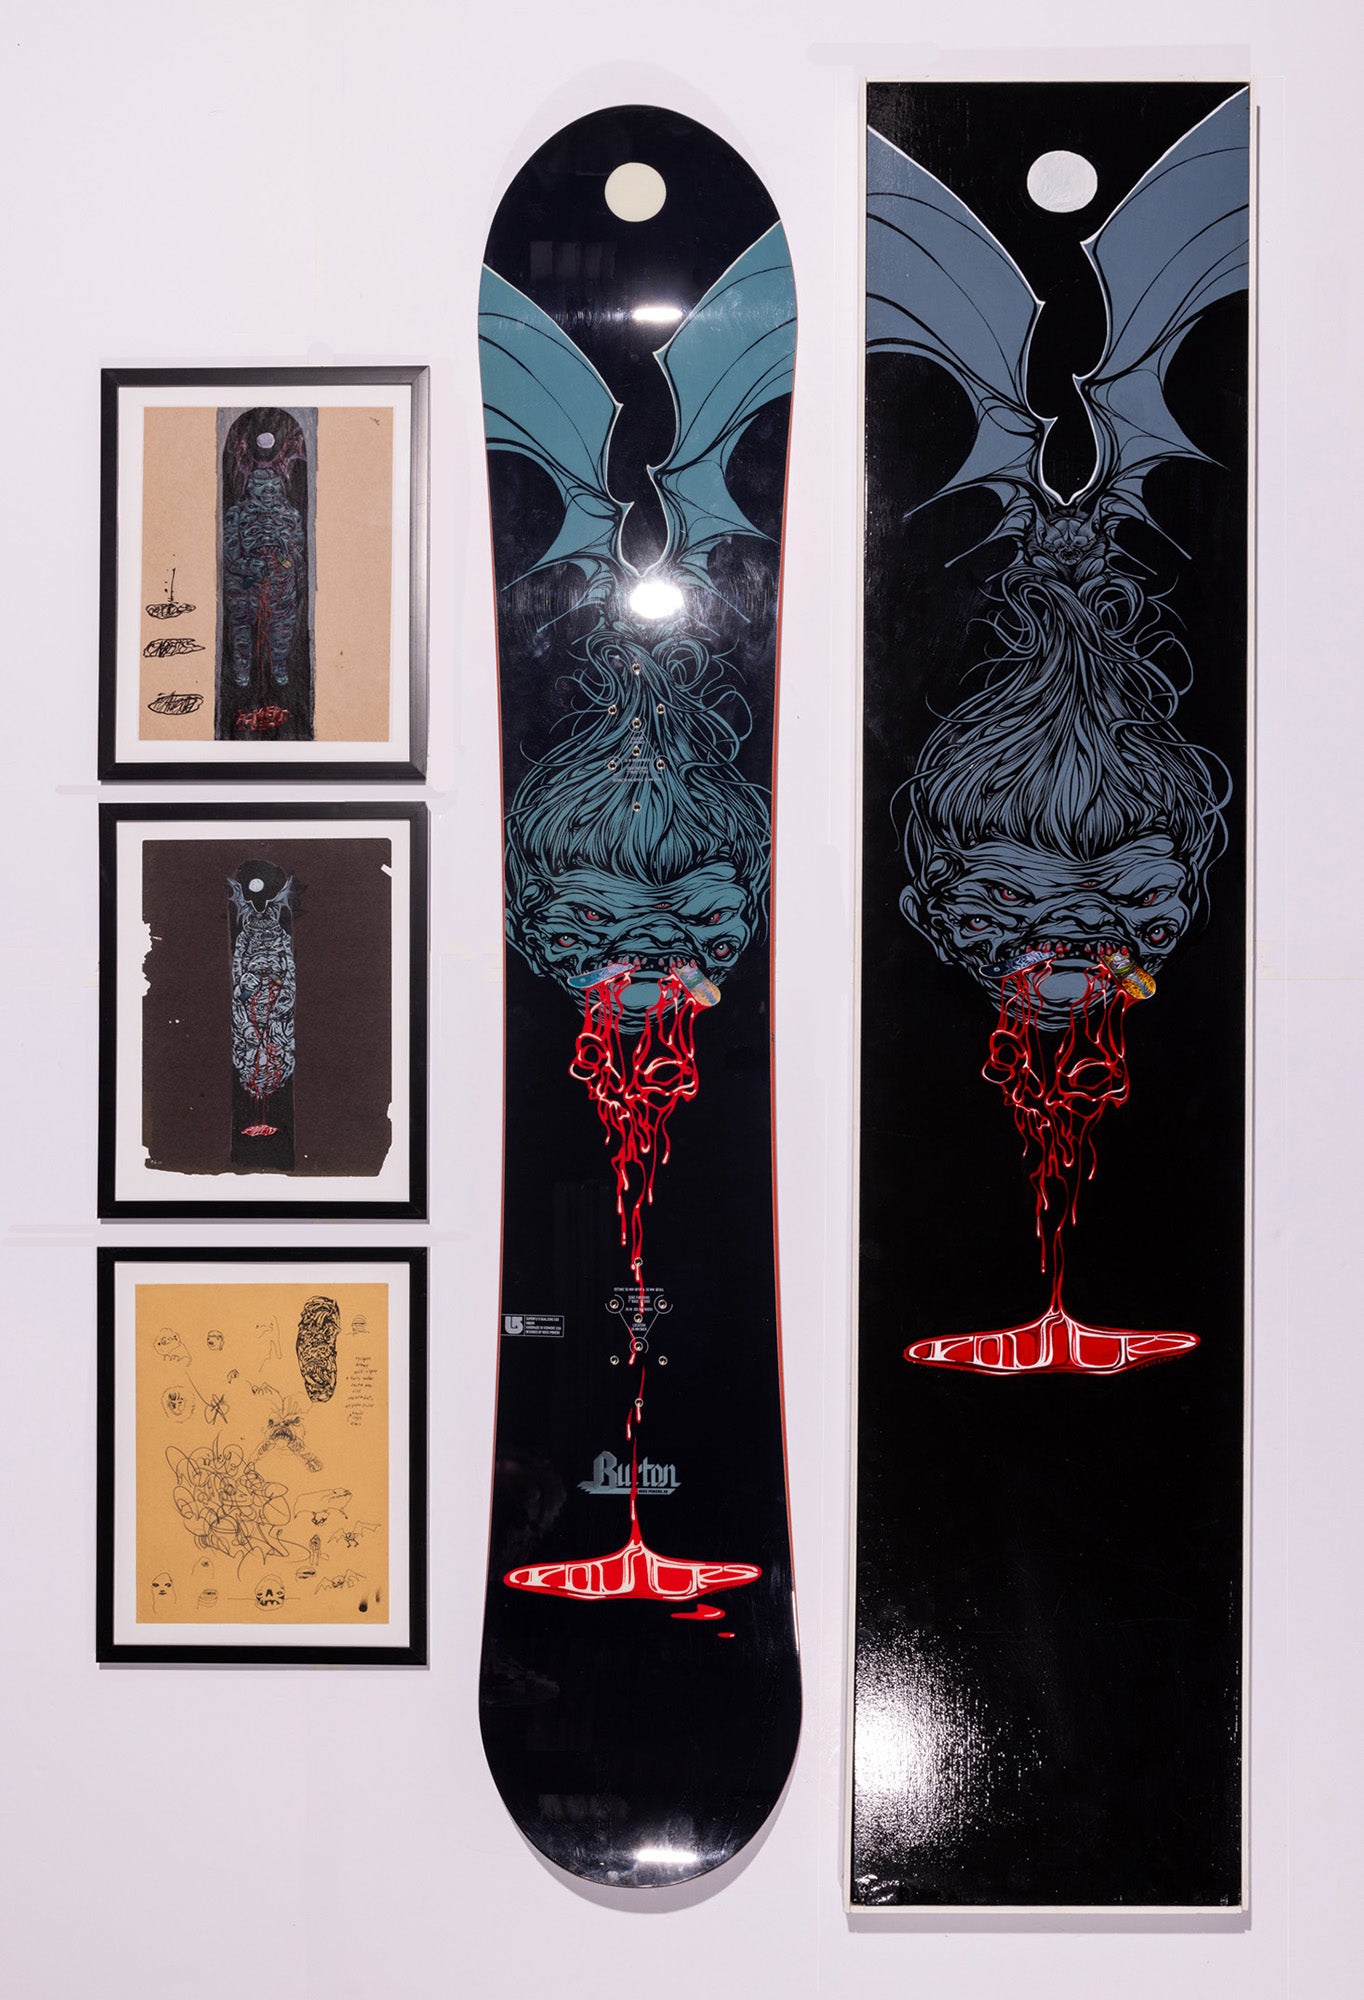 Scott Lenhardt, Ross Powers # 2, ca 2002 plus 3-acrylic on paper, and ink on paper frmed sketches and an acrylic on wood panel signed on the bottom as well as a new unridden 158 "Severed Head" board